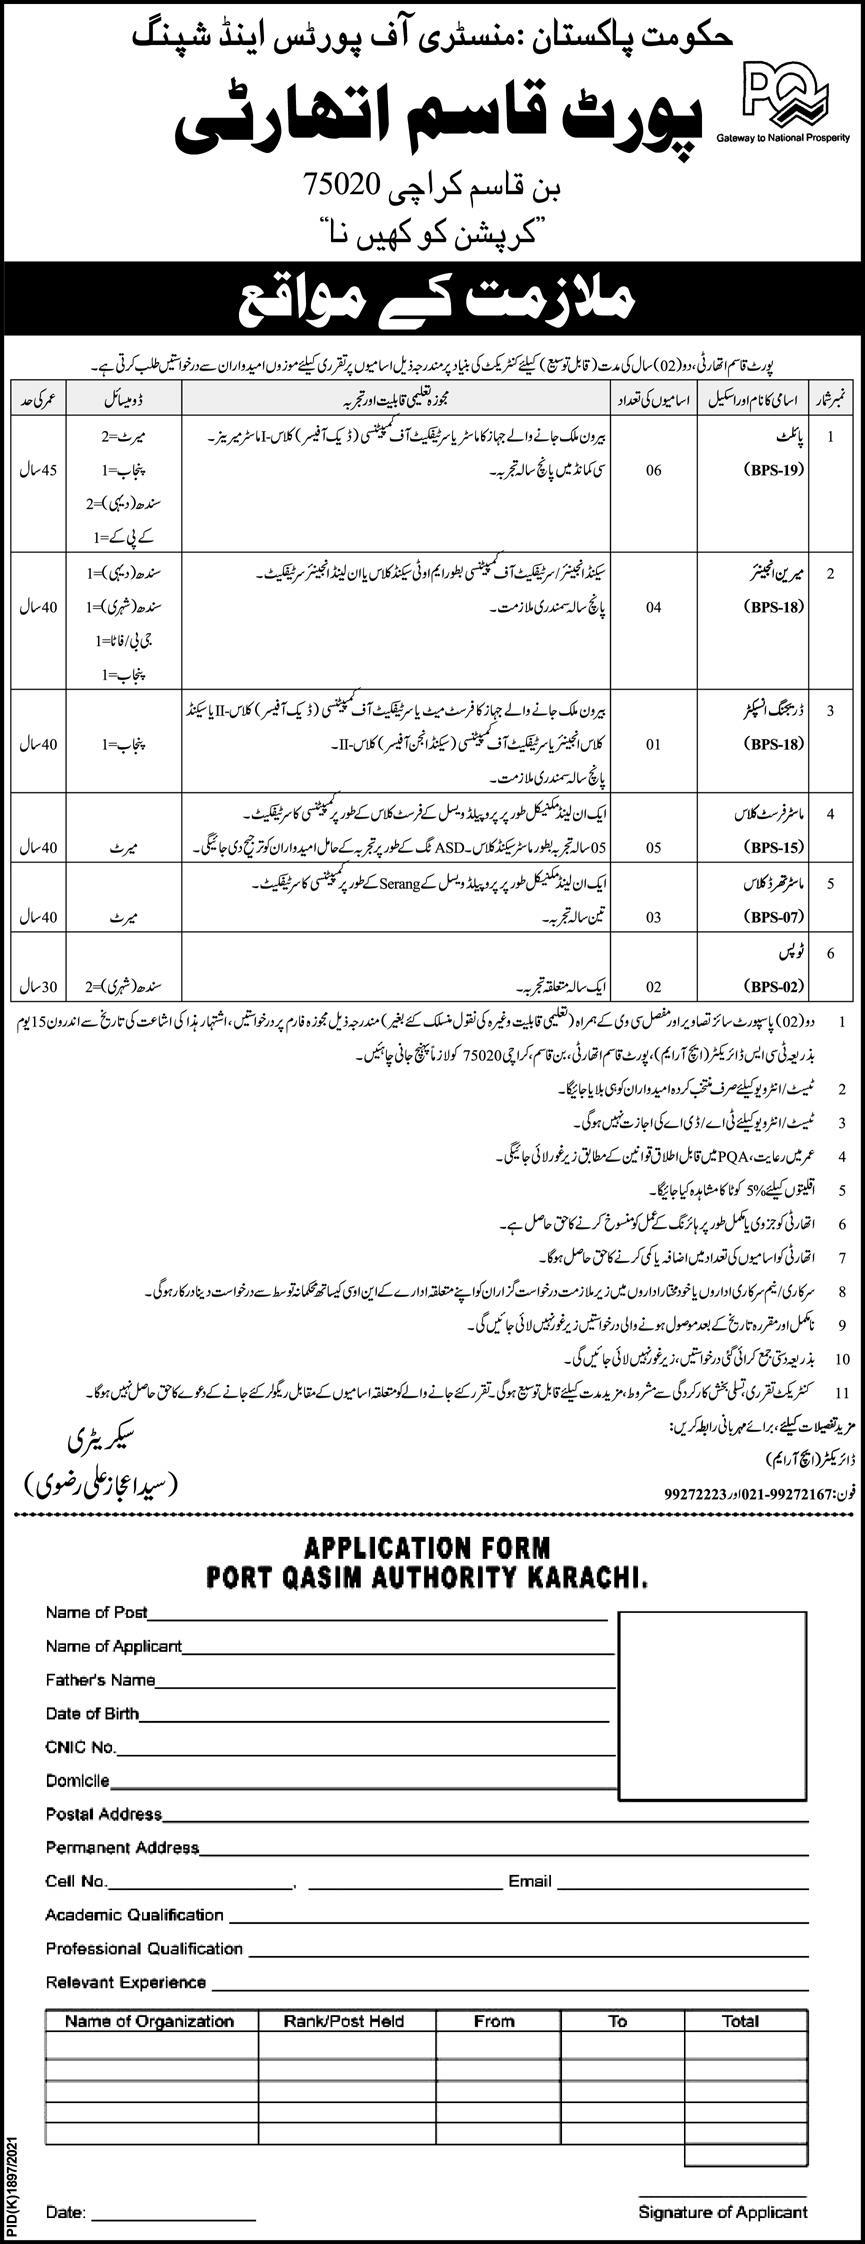 Ministry of Ports and shipping Pakistan Port Qasim Authority Jobs 2022